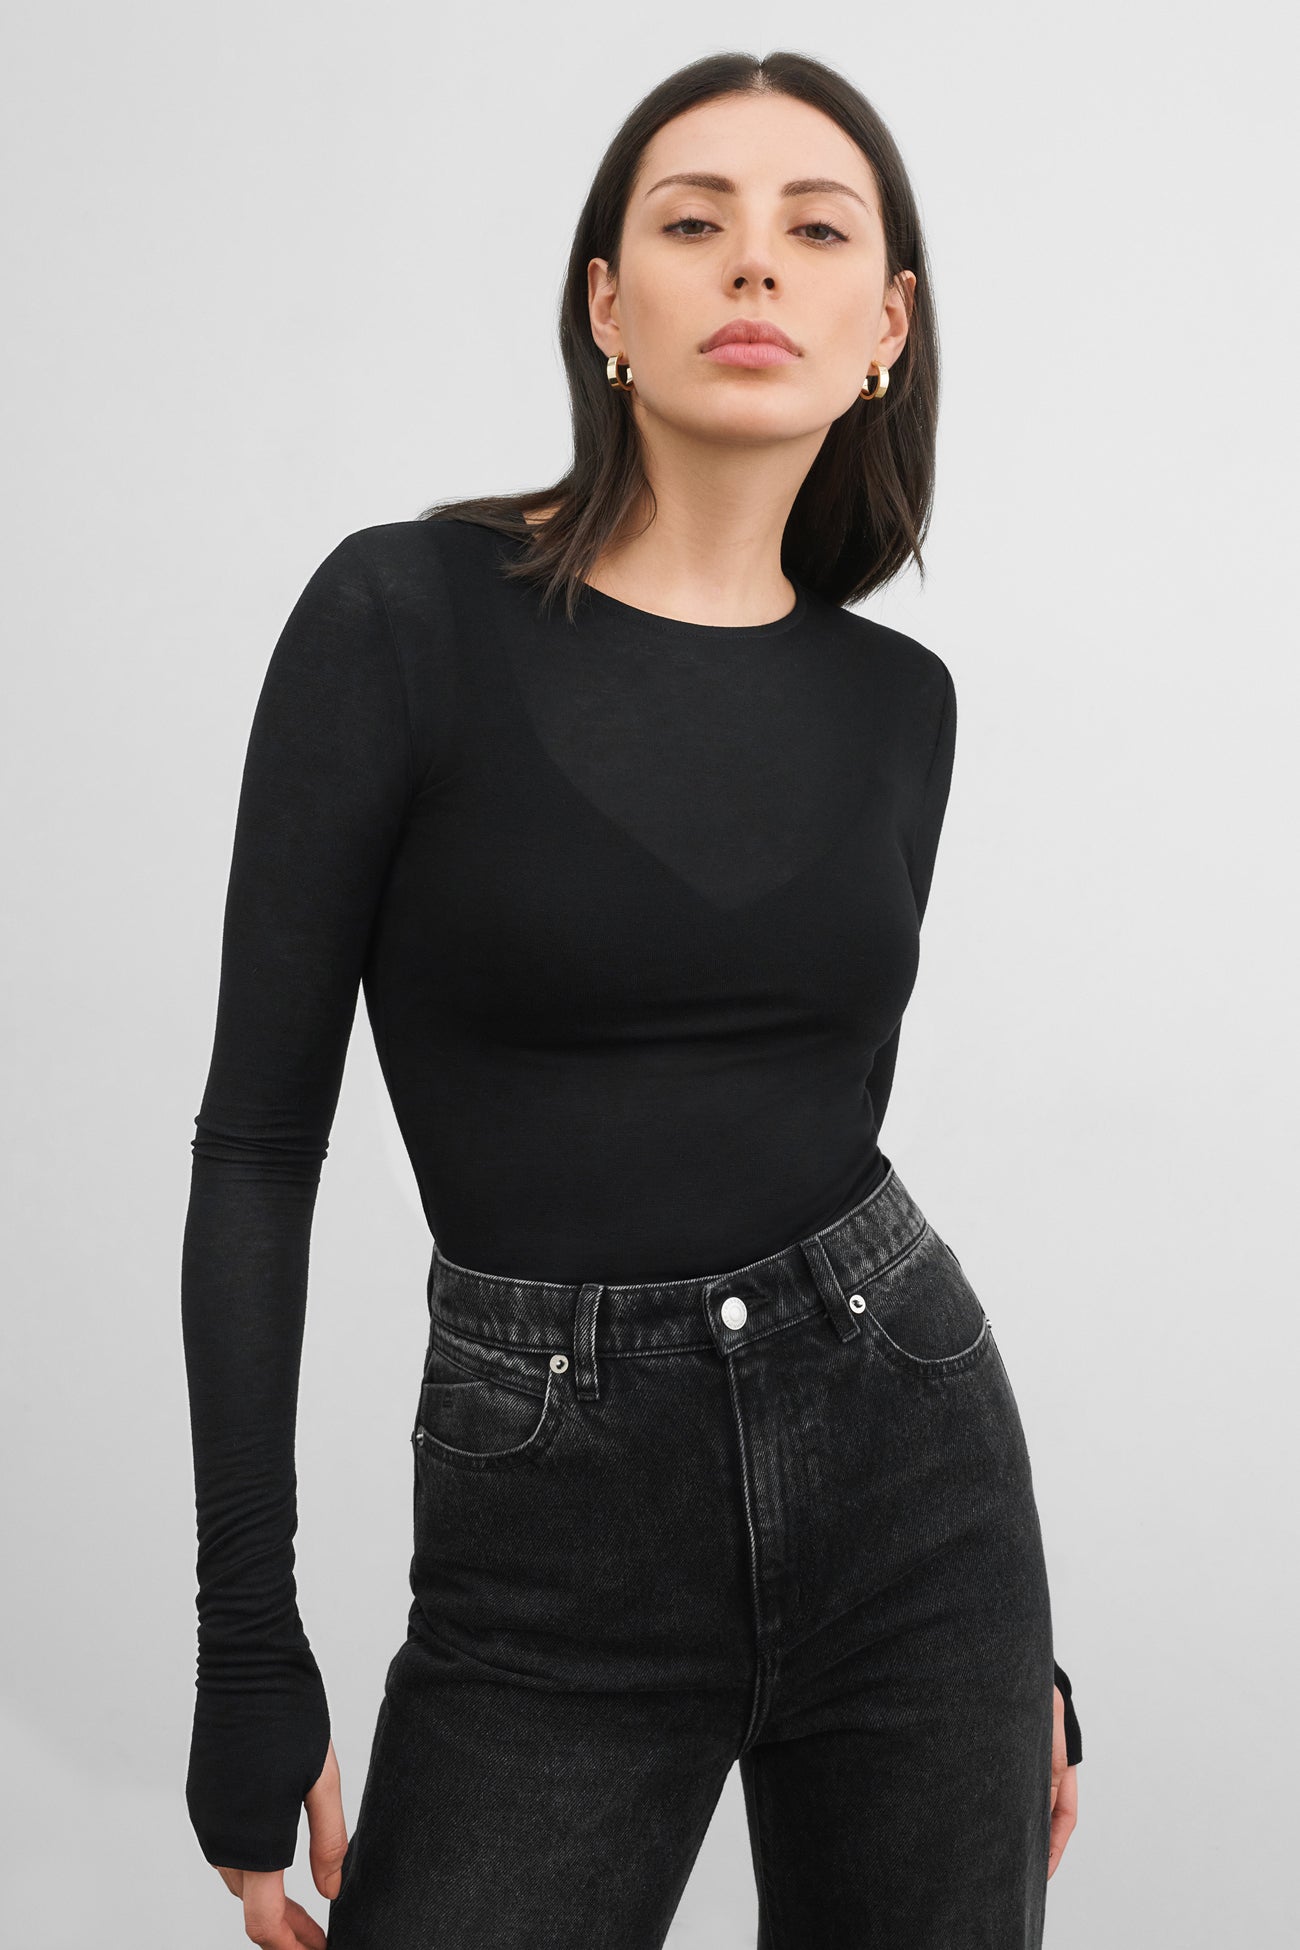 Sheer Black Long Sleeve Fitted Top - Sheer Avalon Top | Marcella